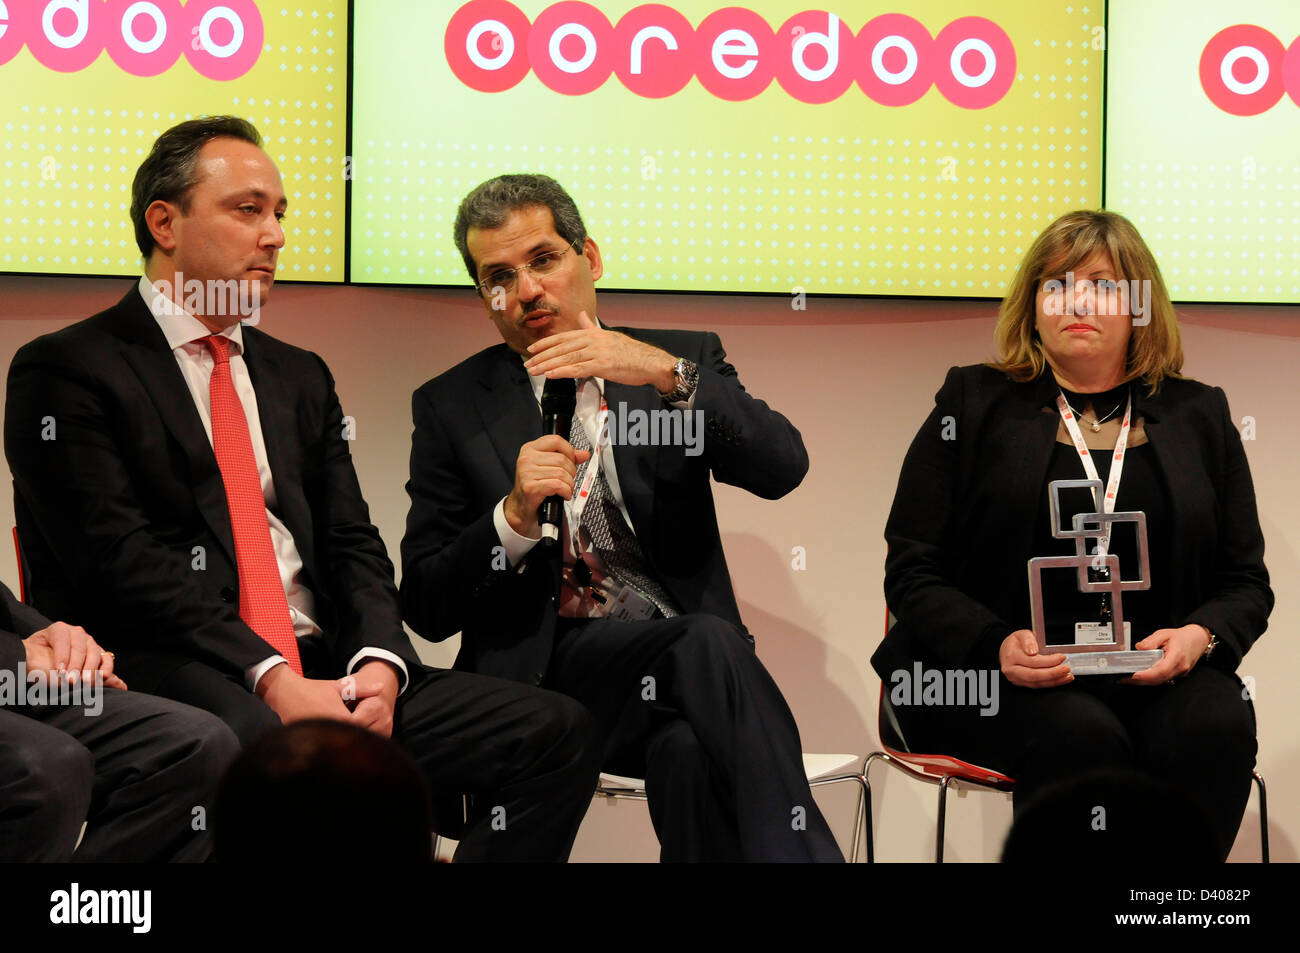 Qatar's Qtel has renamed itself Ooredoo in a bid to bring all its international businesses under a single brand identity the announcement came on Monday evening at Mobile World Congress in Barcelona 2013. The group  GEO Dr. Nasser Marafih explain the desition facts in the OOREDOO stand, Barcelona. 260213. Foto: Rosmi Duaso Stock Photo